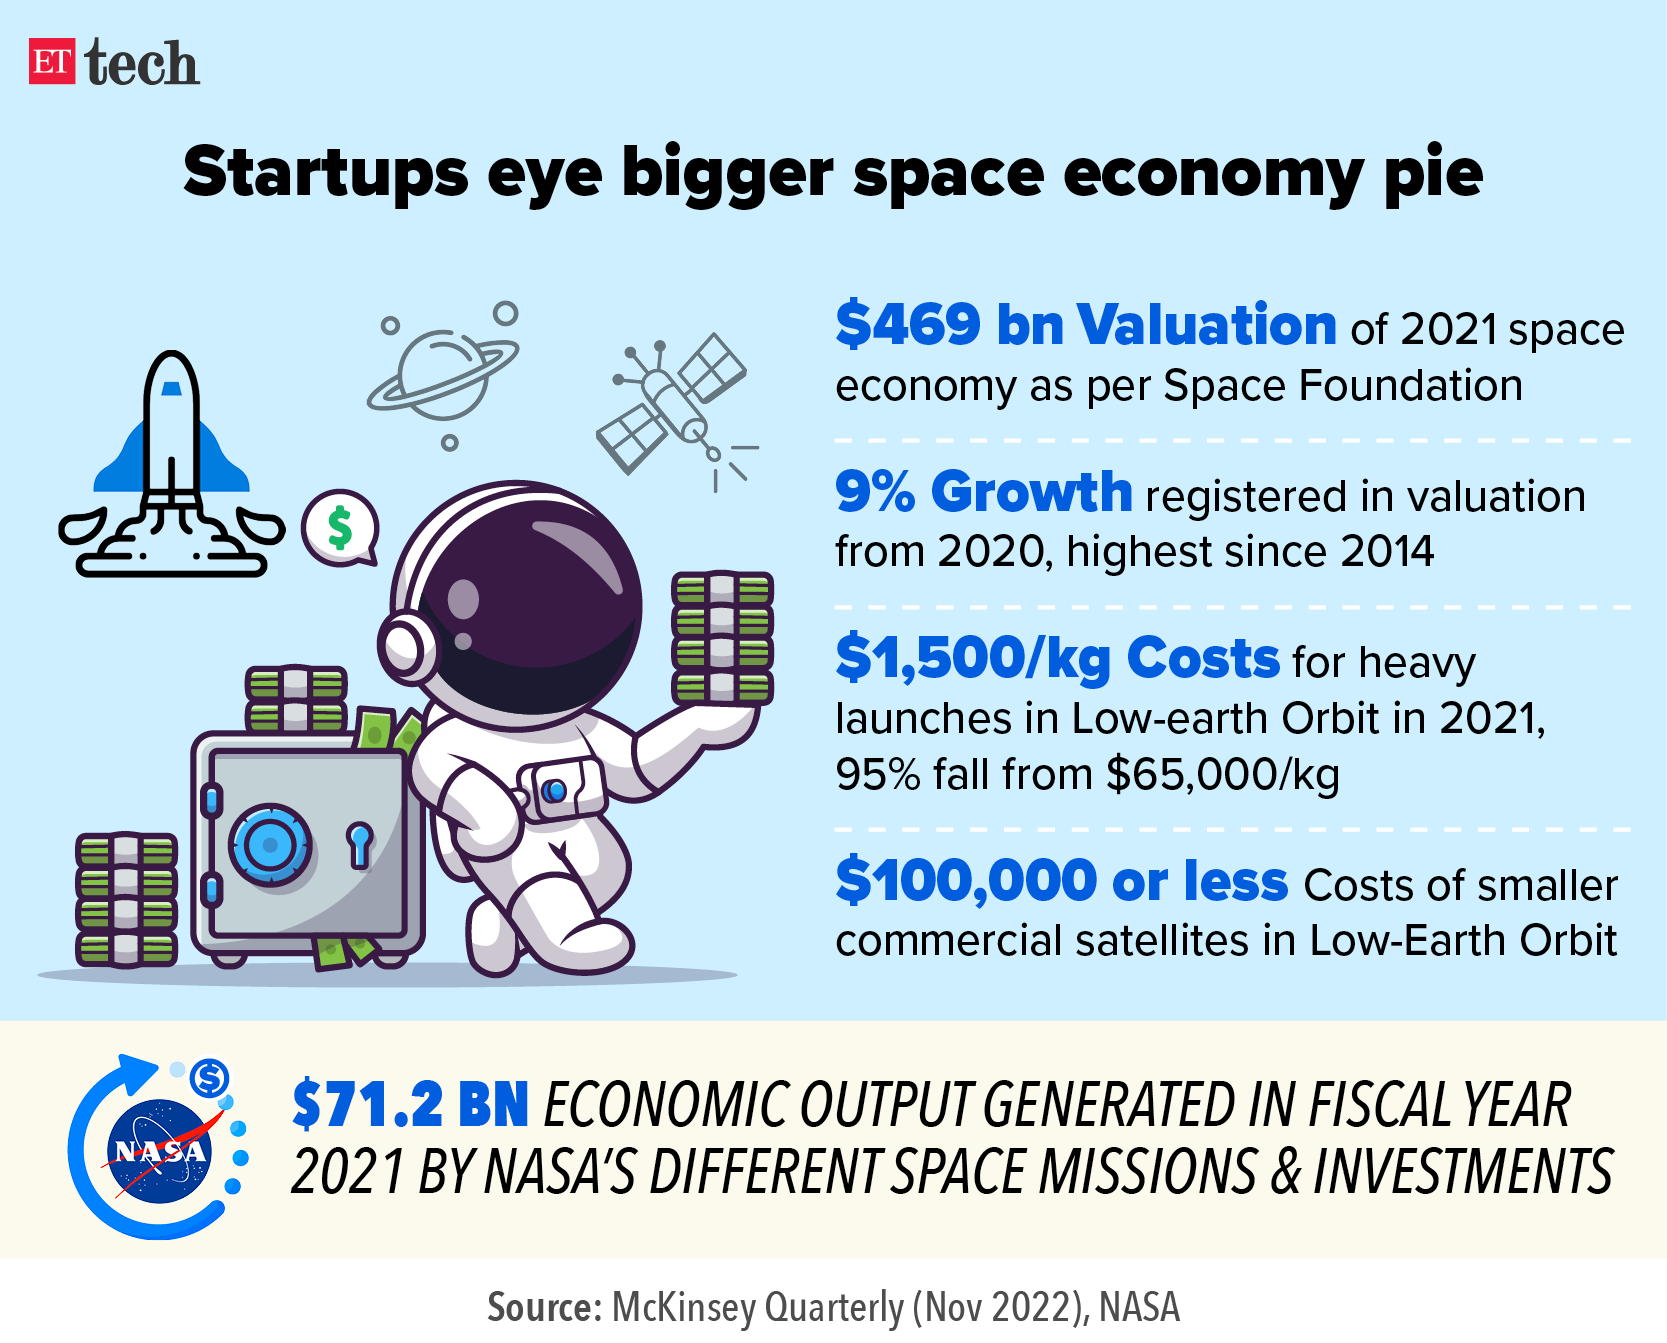 Space startups